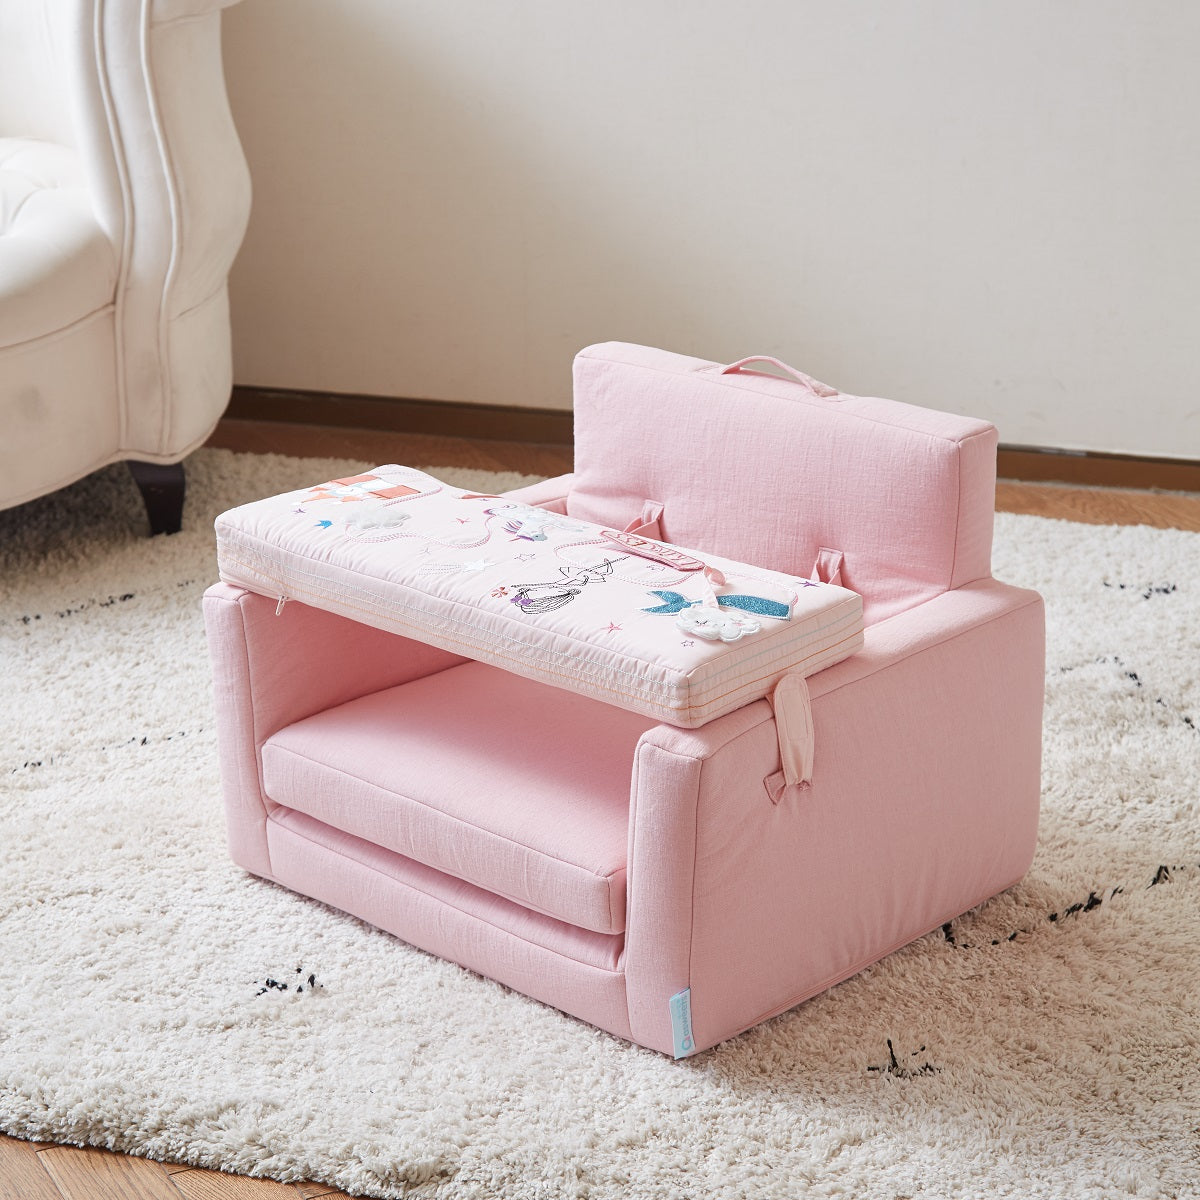 Baby Activity Square Chair - Princess